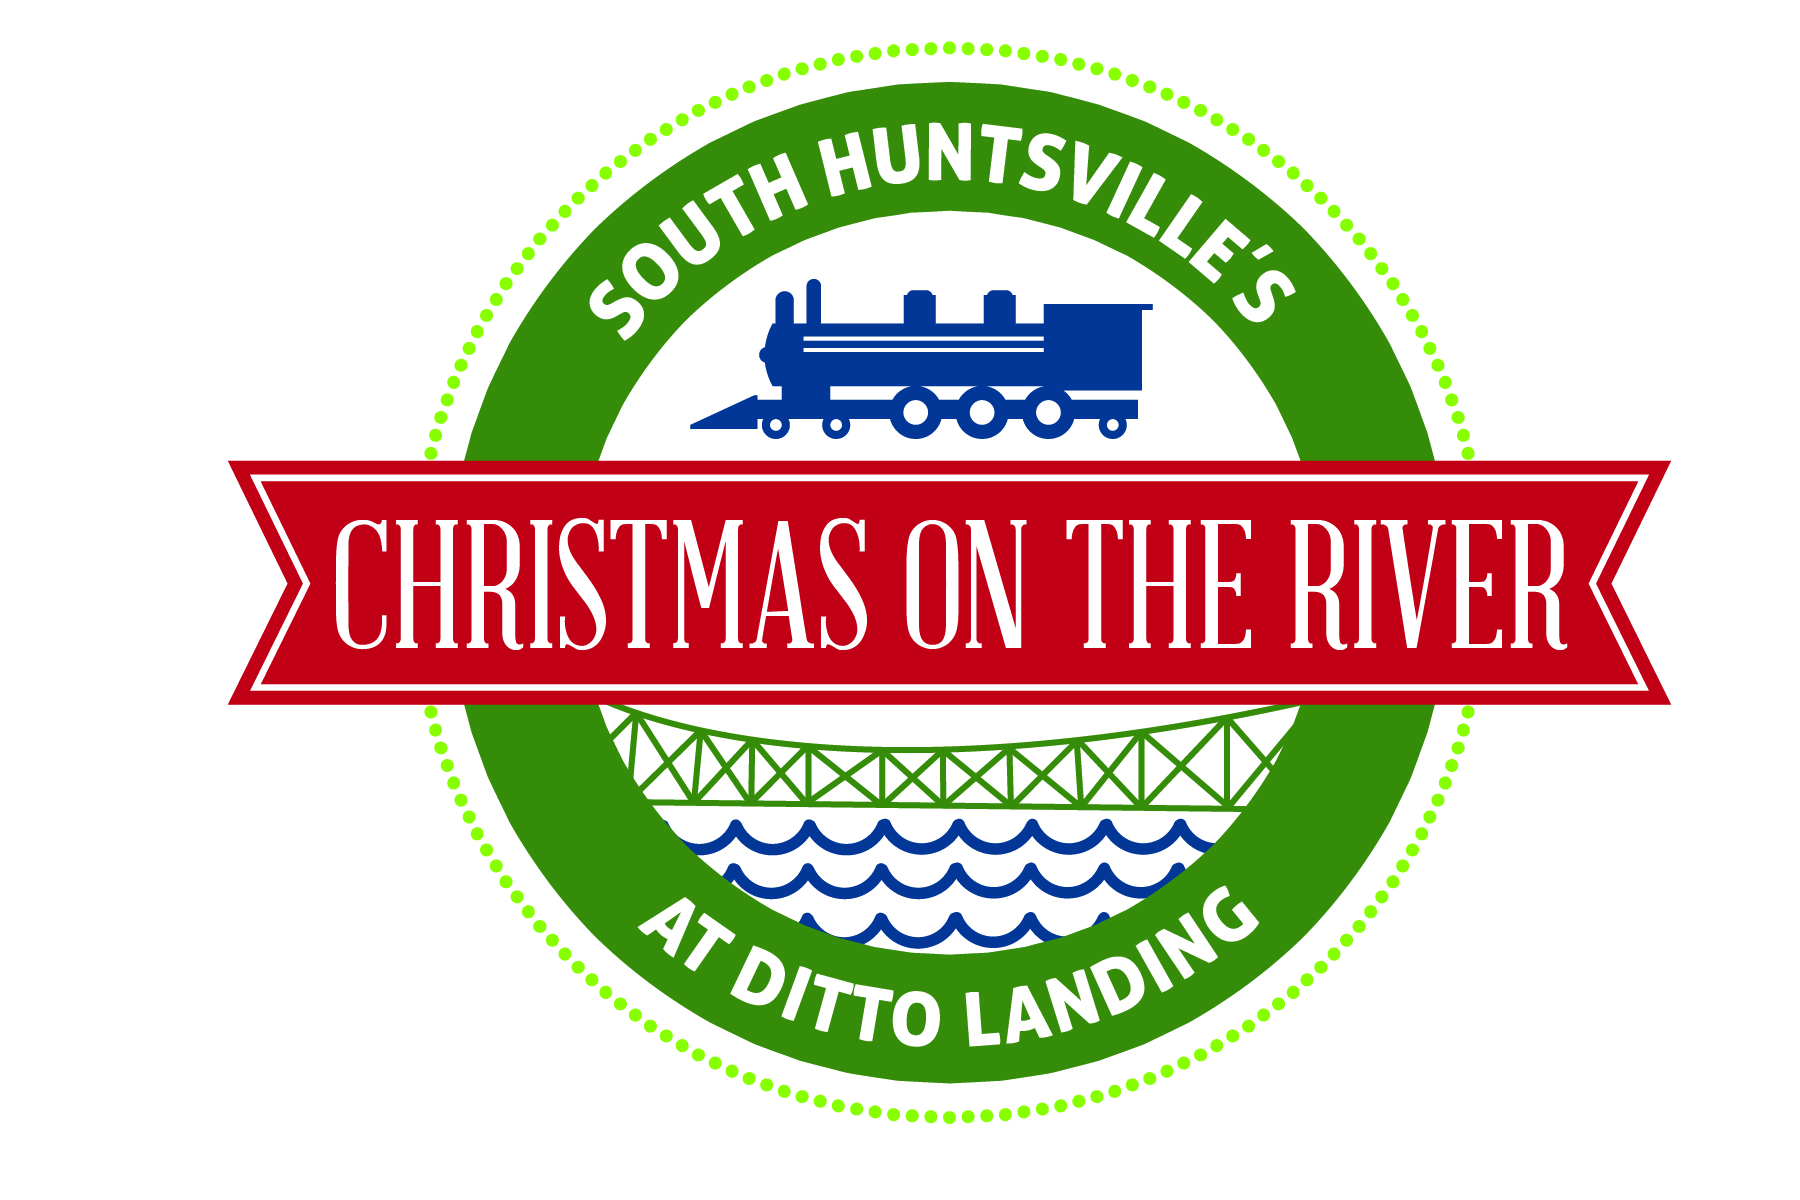 South Huntsville's Christmas on the River at Ditto Landing